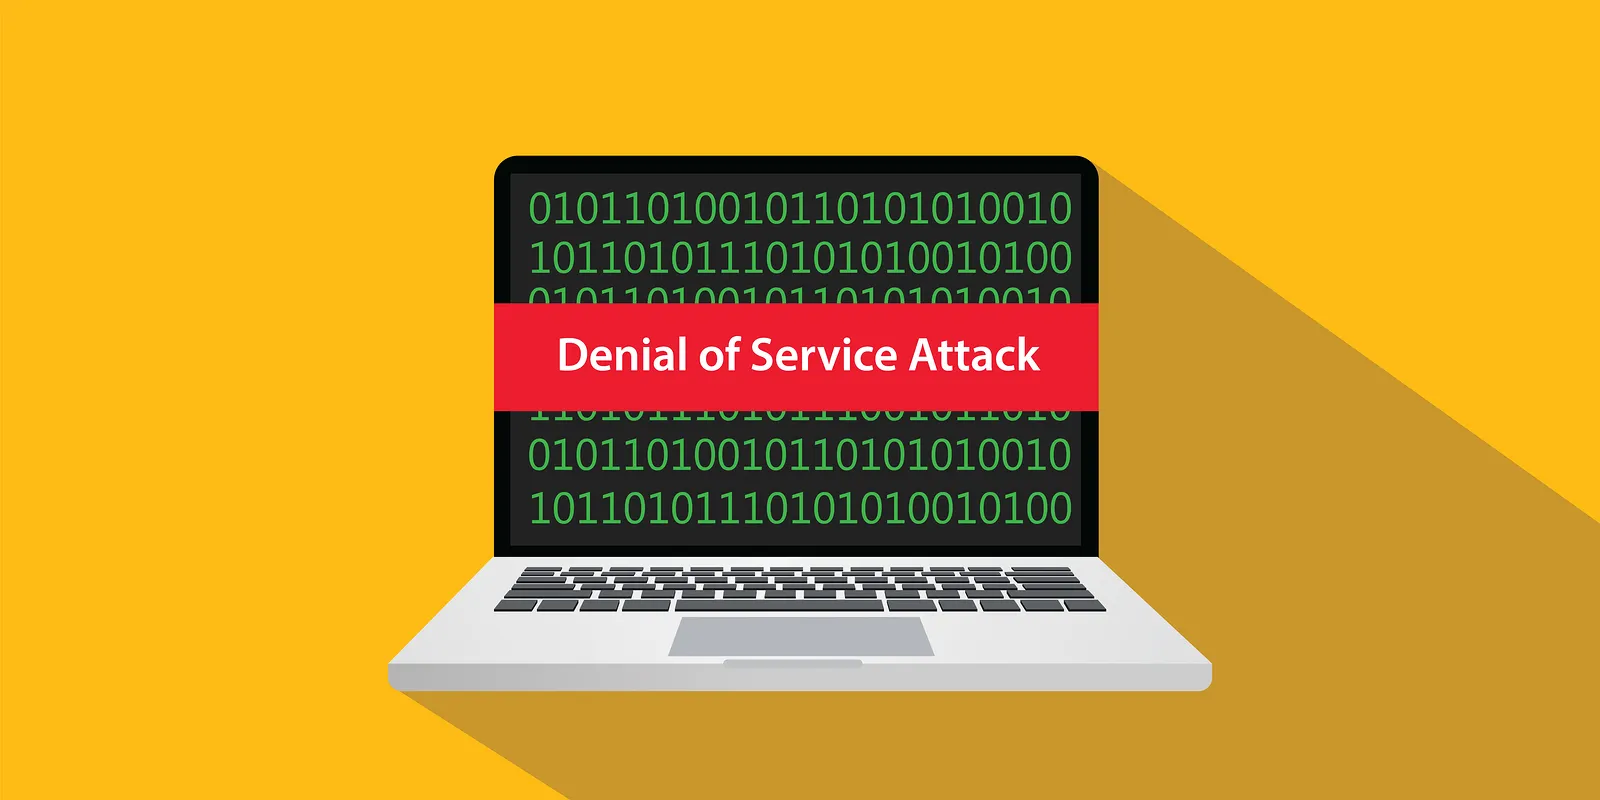 Is DDoSing (Distributed Denial of Service) a Cyber-Crime?